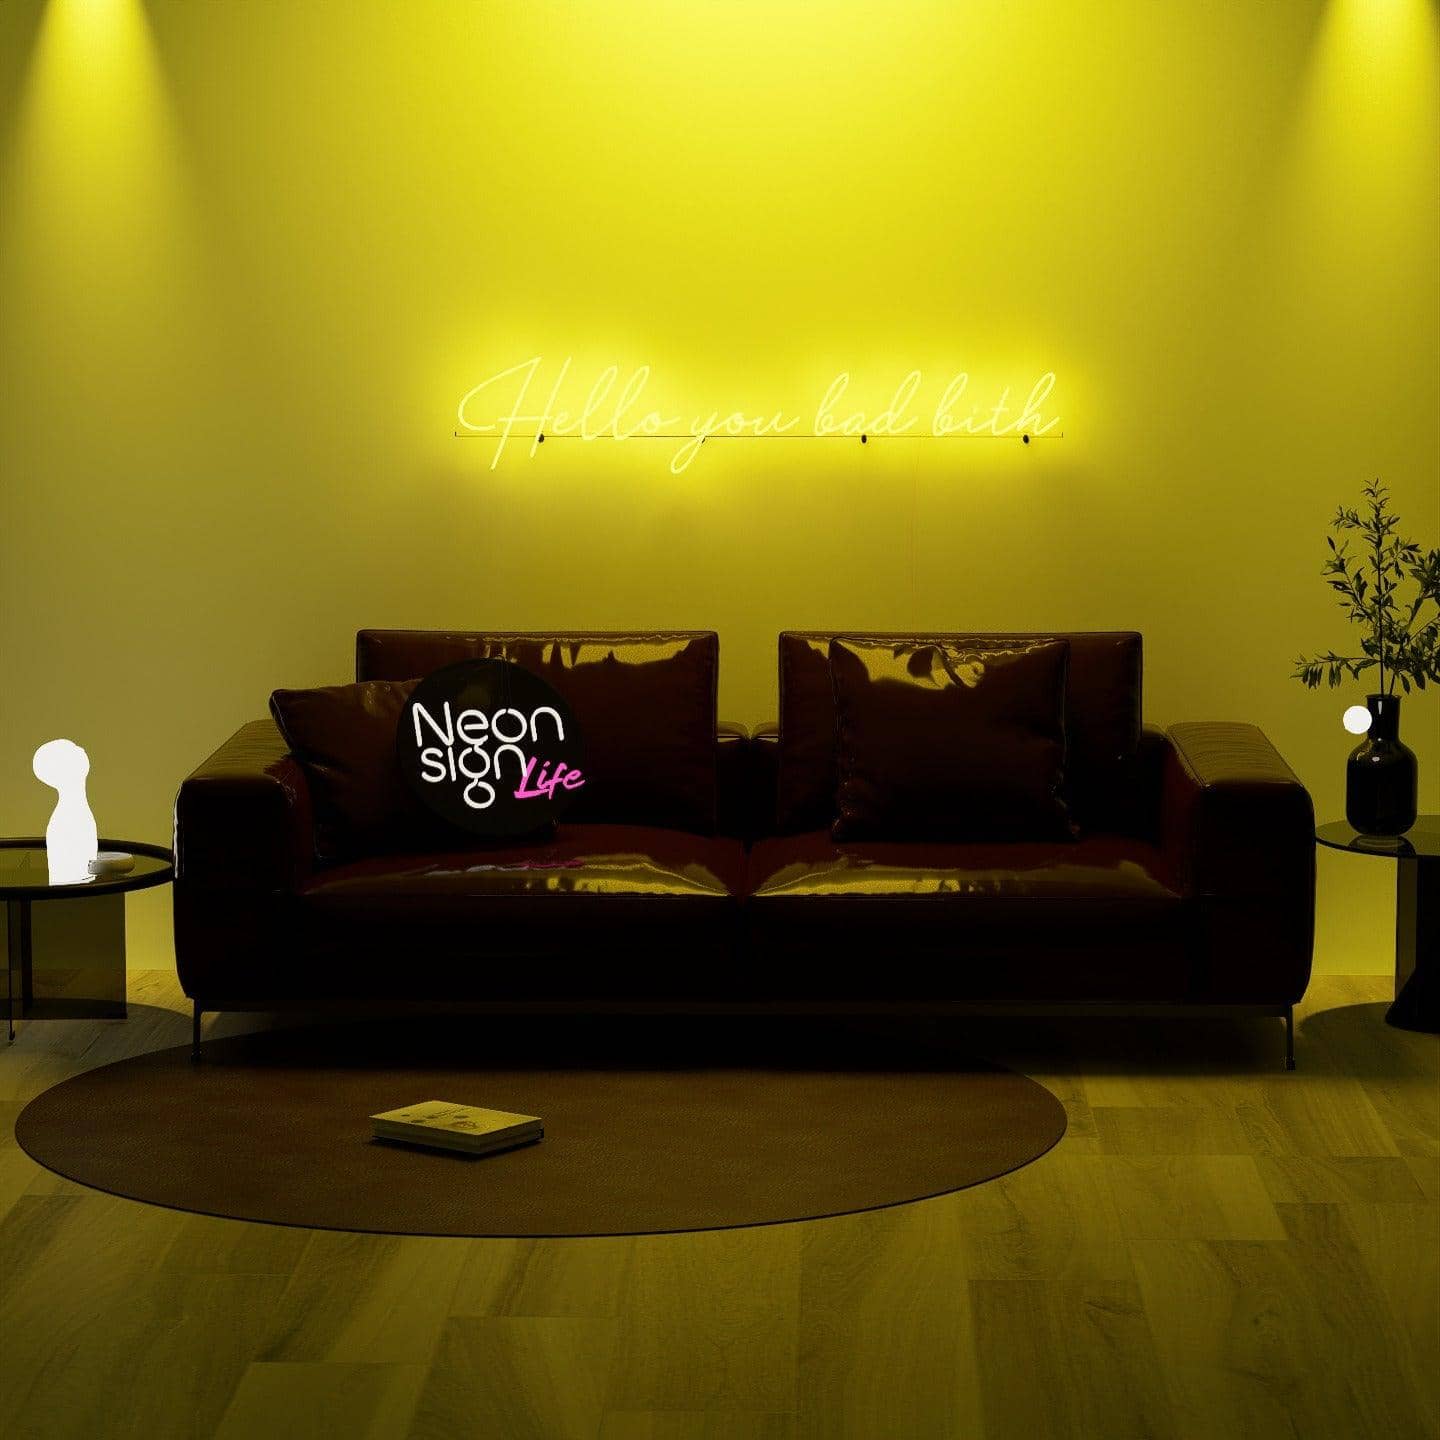 night-shot-with-golden-neon-lights-hanging-on-the-wall-for-display-hello-you-bad-bith